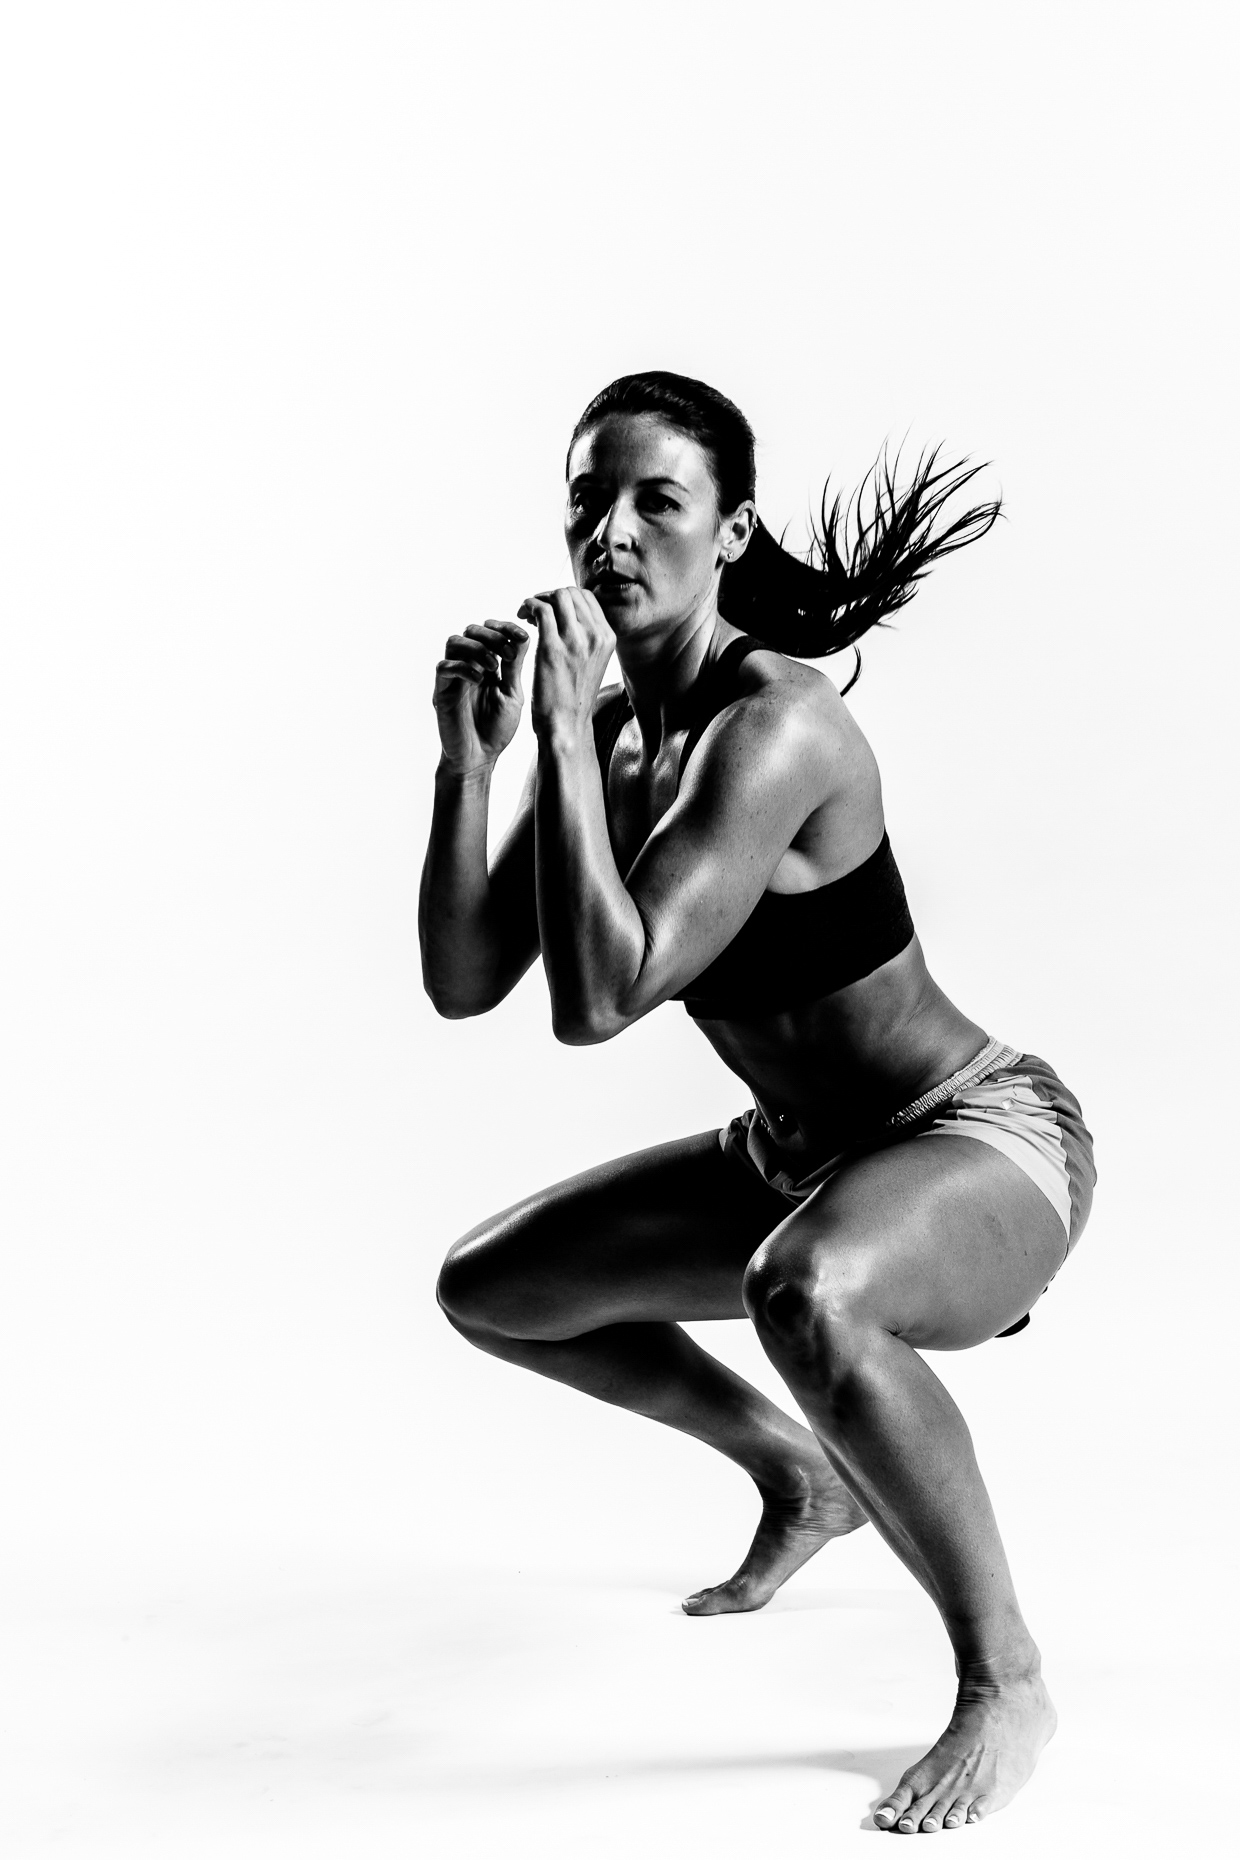 Female B&W martial arts instructor in fighing squat stance by andy batt